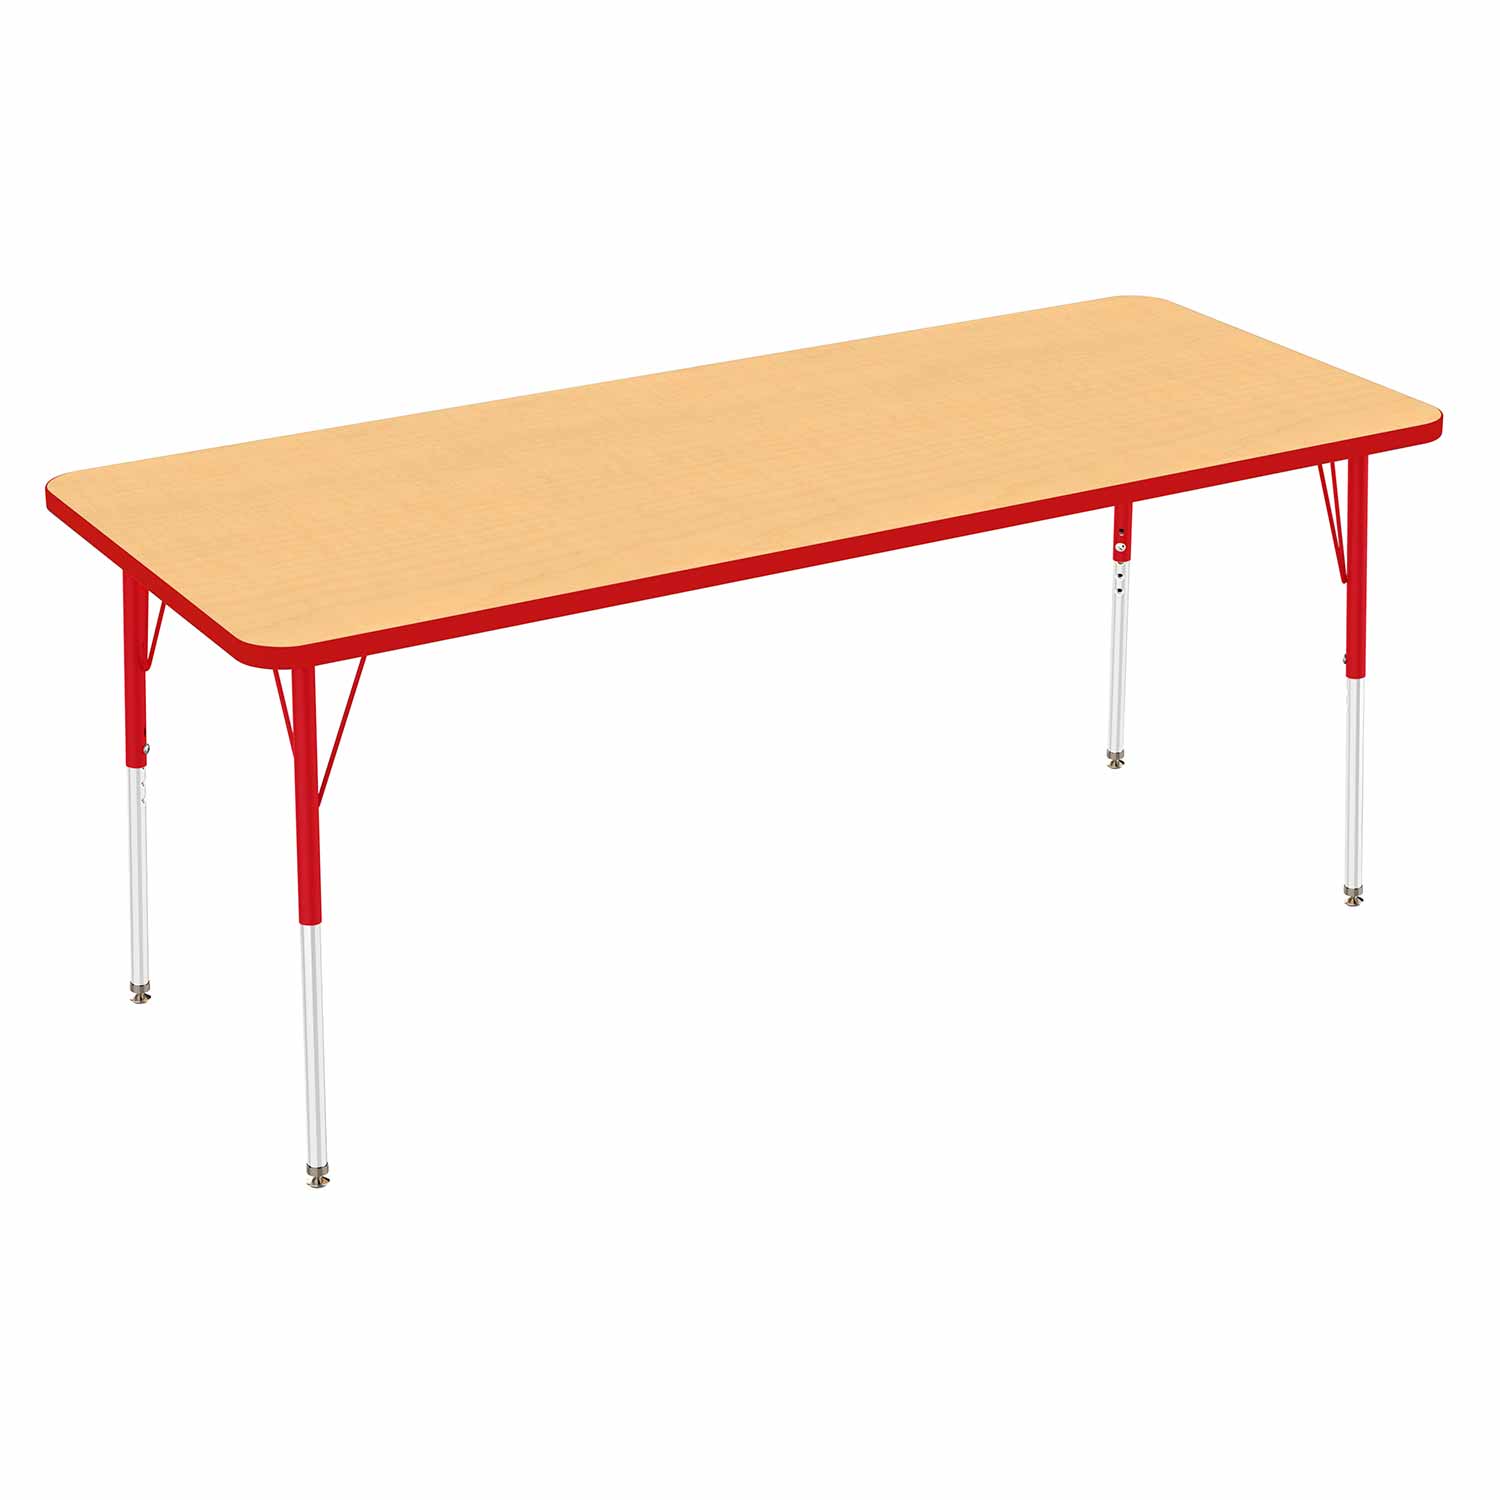 Activity Table, Rectangle 30" x 60", Maple Top Red Edge & Legs